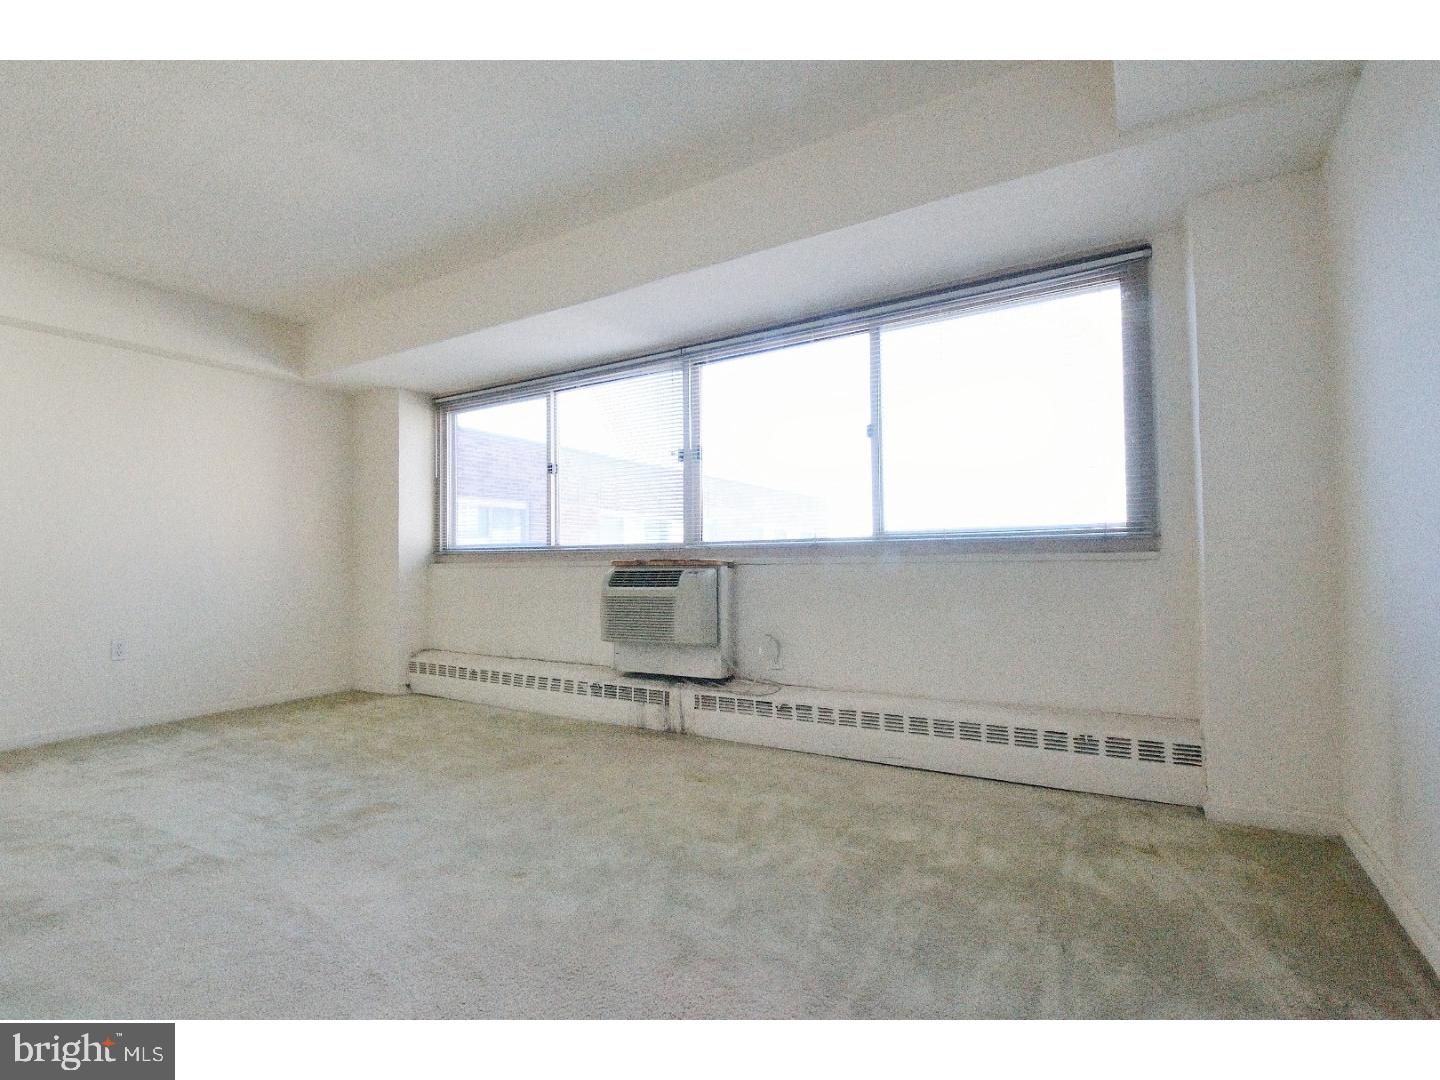 view of an empty room with a window